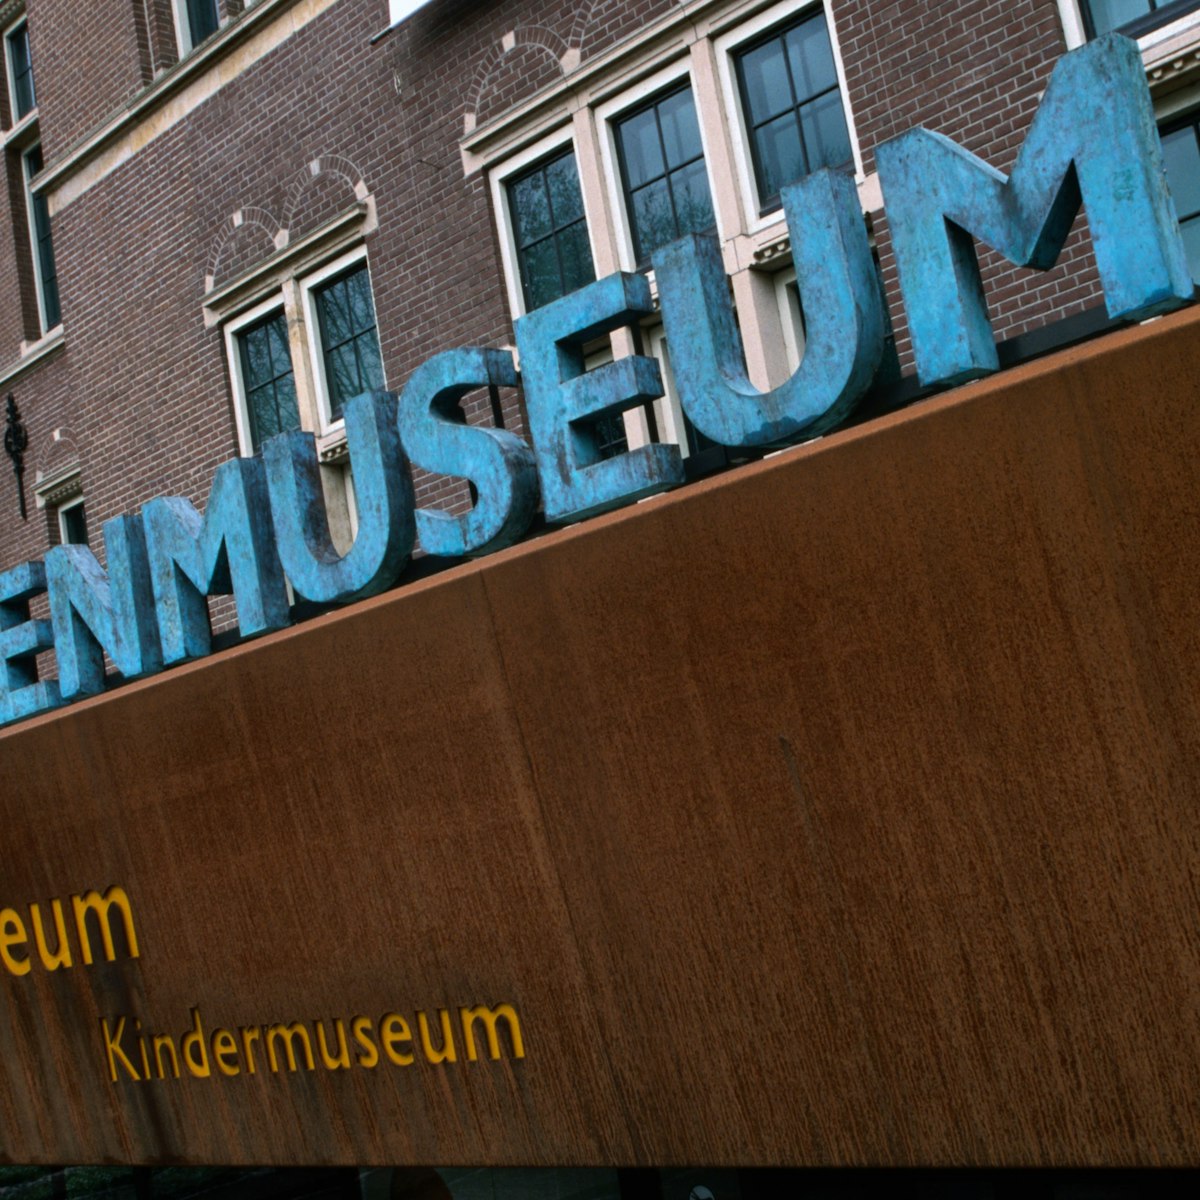 The sign for the Kindermuseum at the Tropenmuseum.